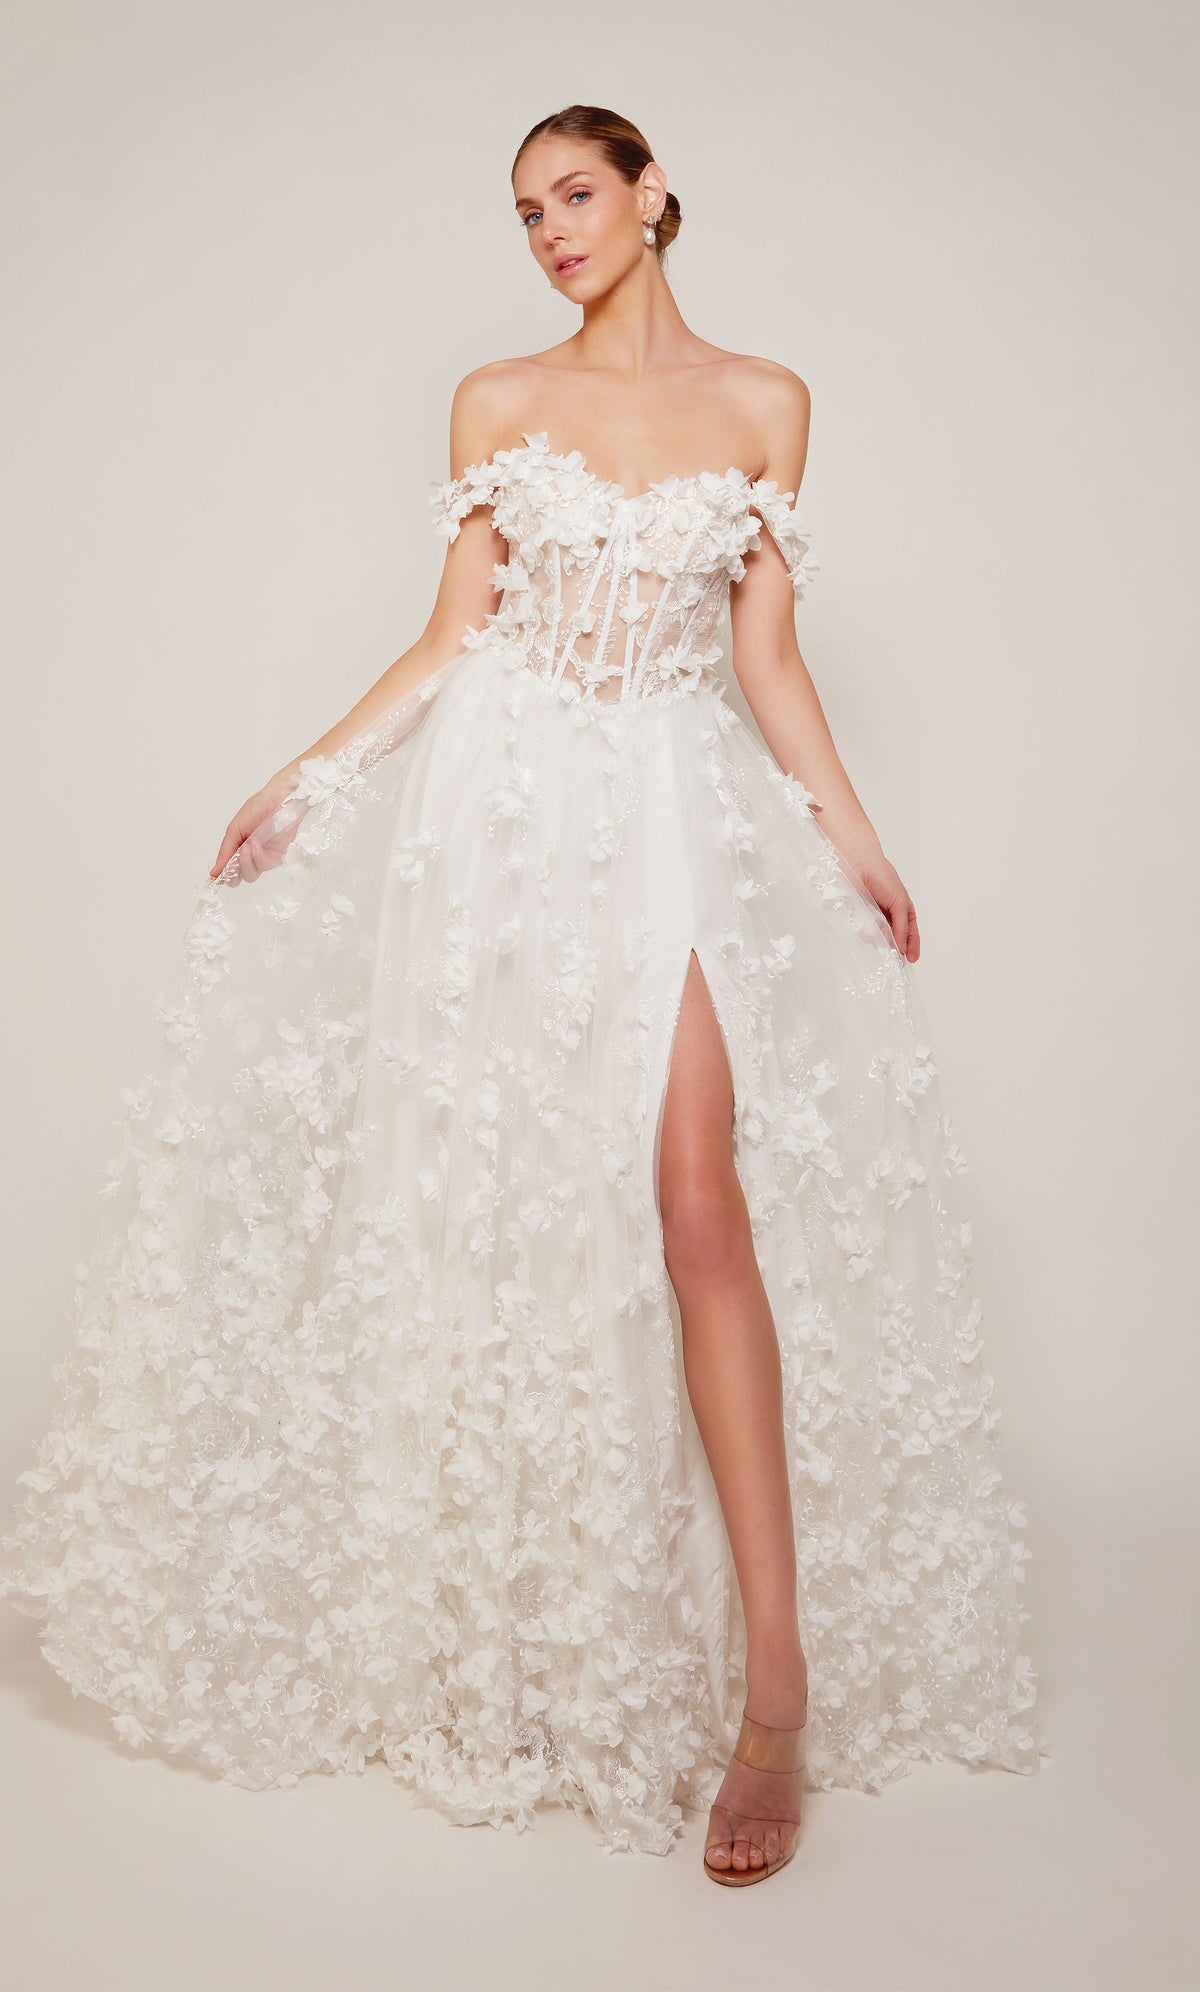 Ivory off the shoulder corset prom dress with an sheer lace up bodice and delicate 3d flowers throughout.